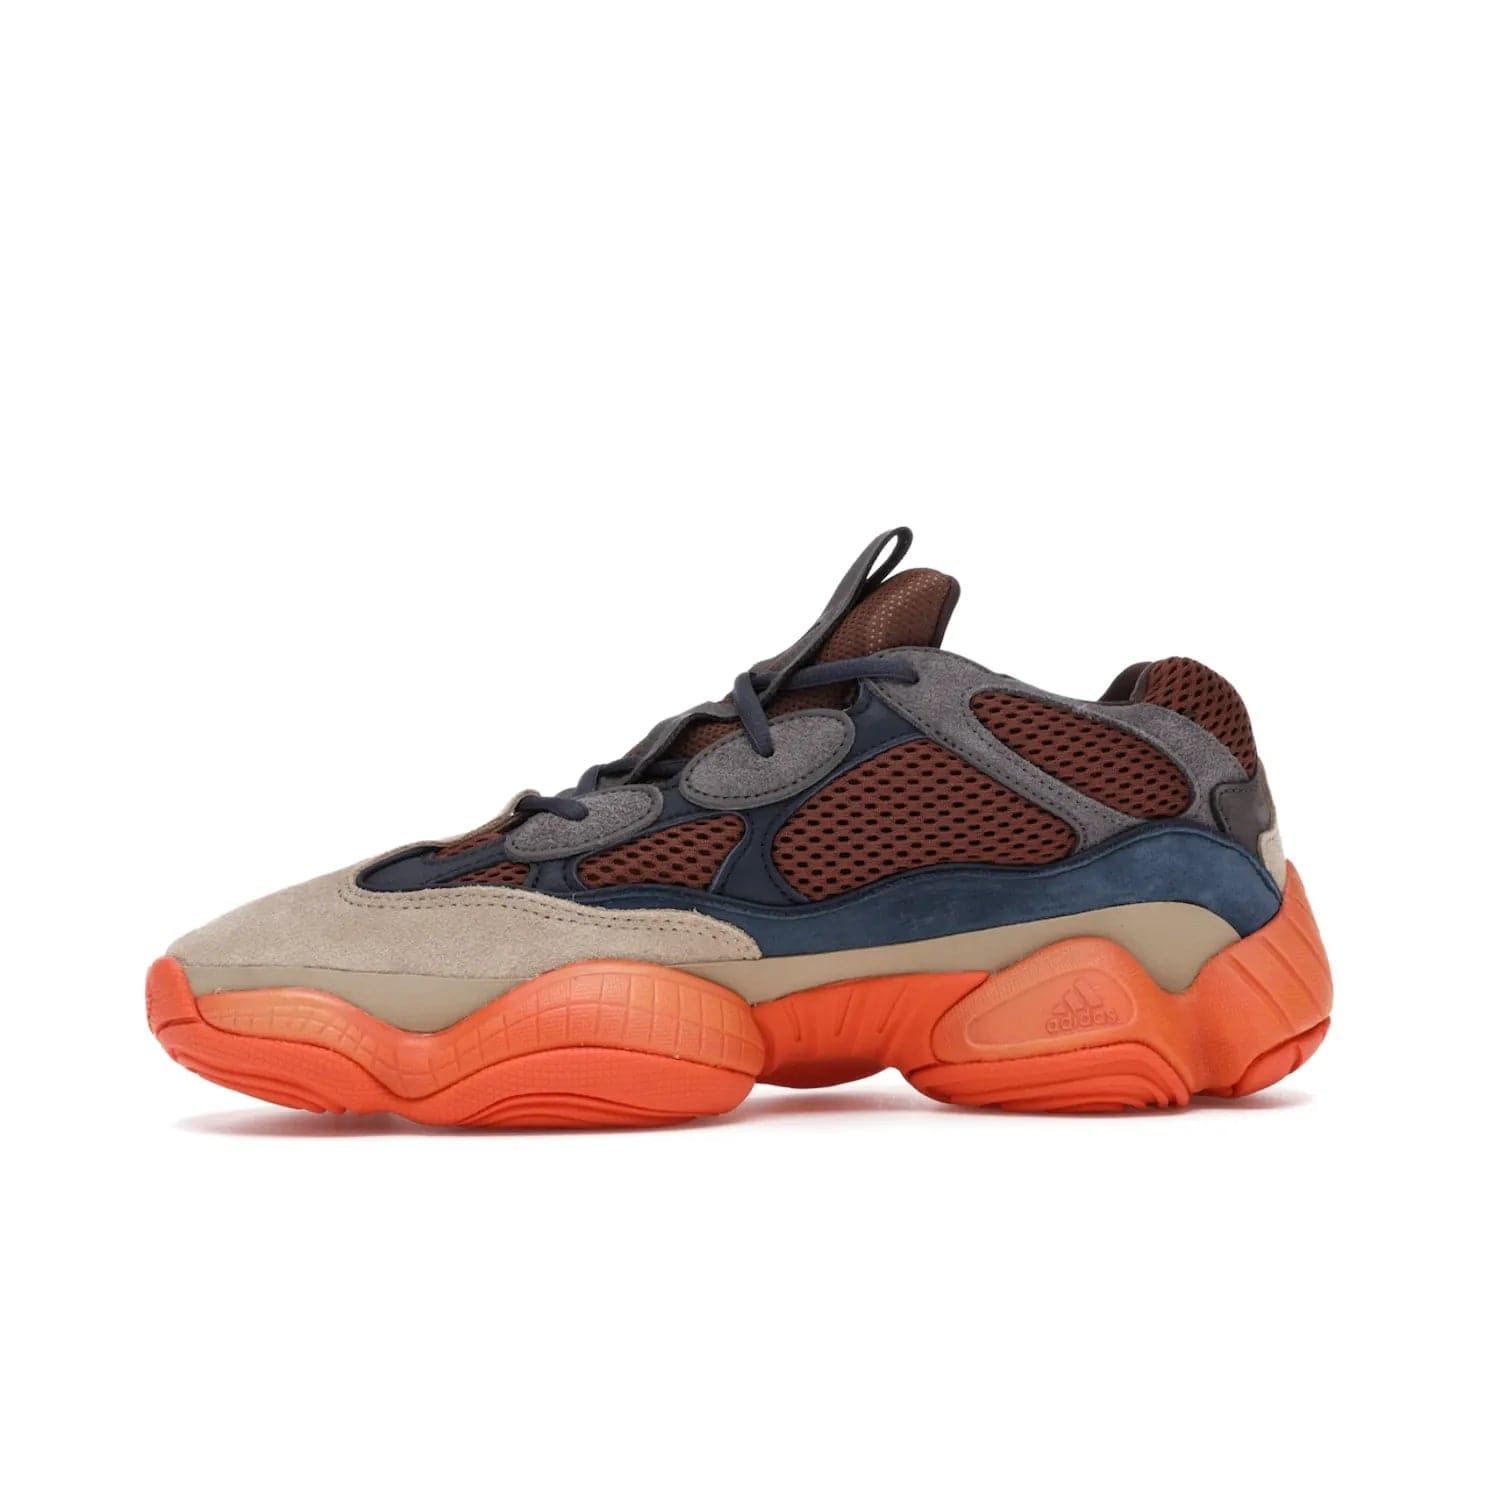 adidas Yeezy 500 Enflame - Image 18 - Only at www.BallersClubKickz.com - Step into style with the adidas Yeezy 500 Enflame. Mix of mesh, leather, and suede layered together to create tonal-brown, dark blue, & orange. Orange AdiPRENE sole provides superior cushioning & comfort. Get yours and experience maximum style.